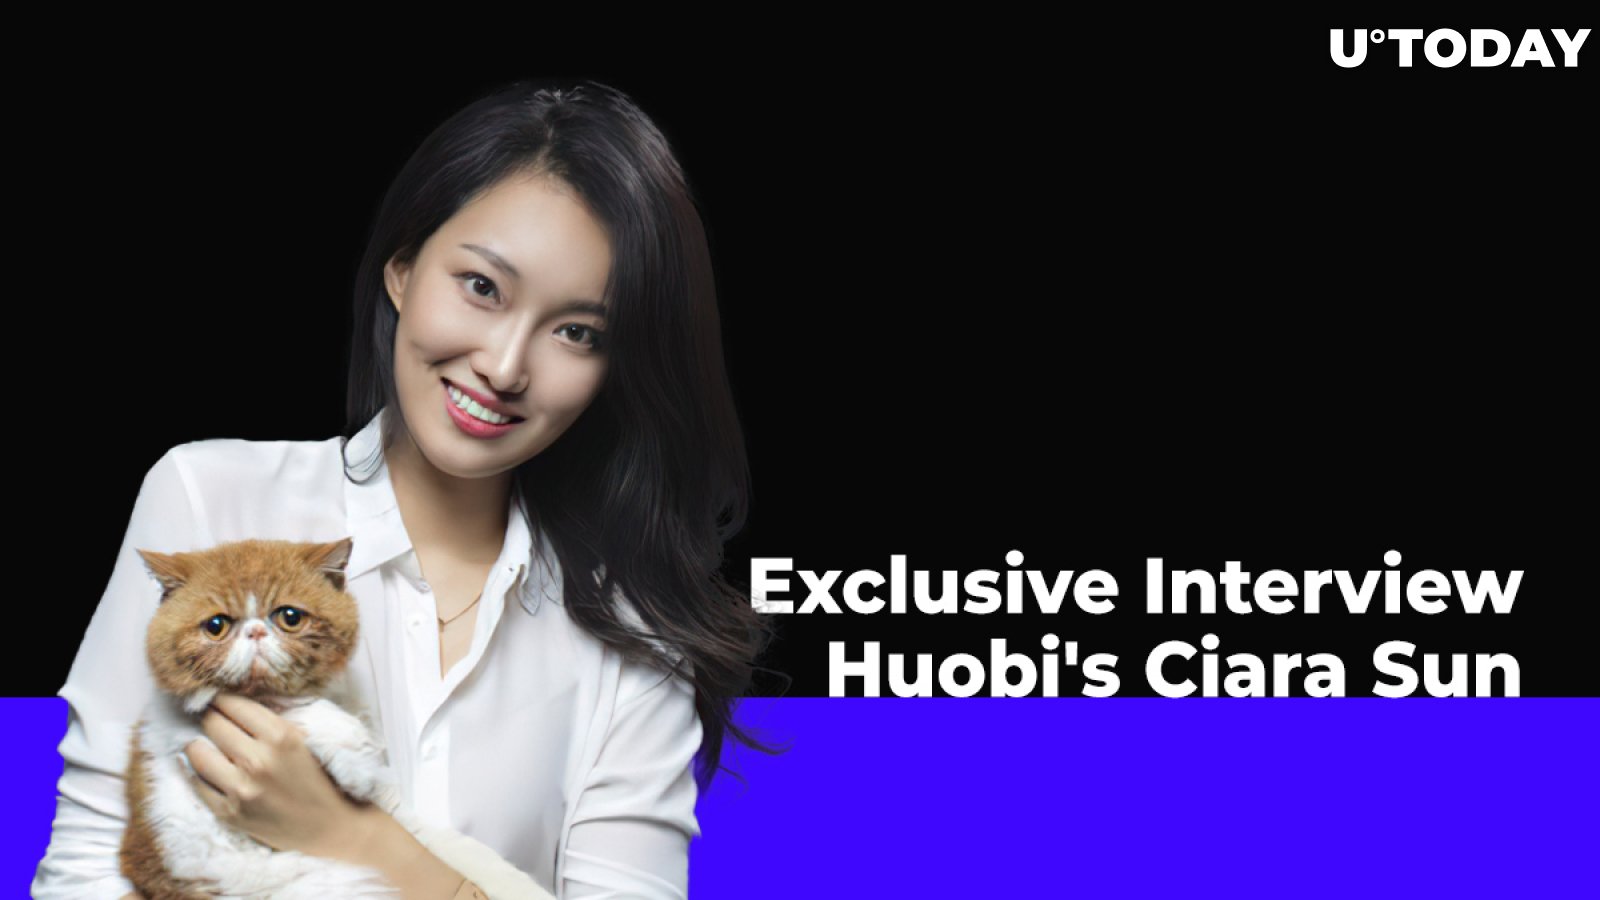 Decentralized Perpetual Swap Protocols: What Are They? Interview with Huobi’s Ciara Sun